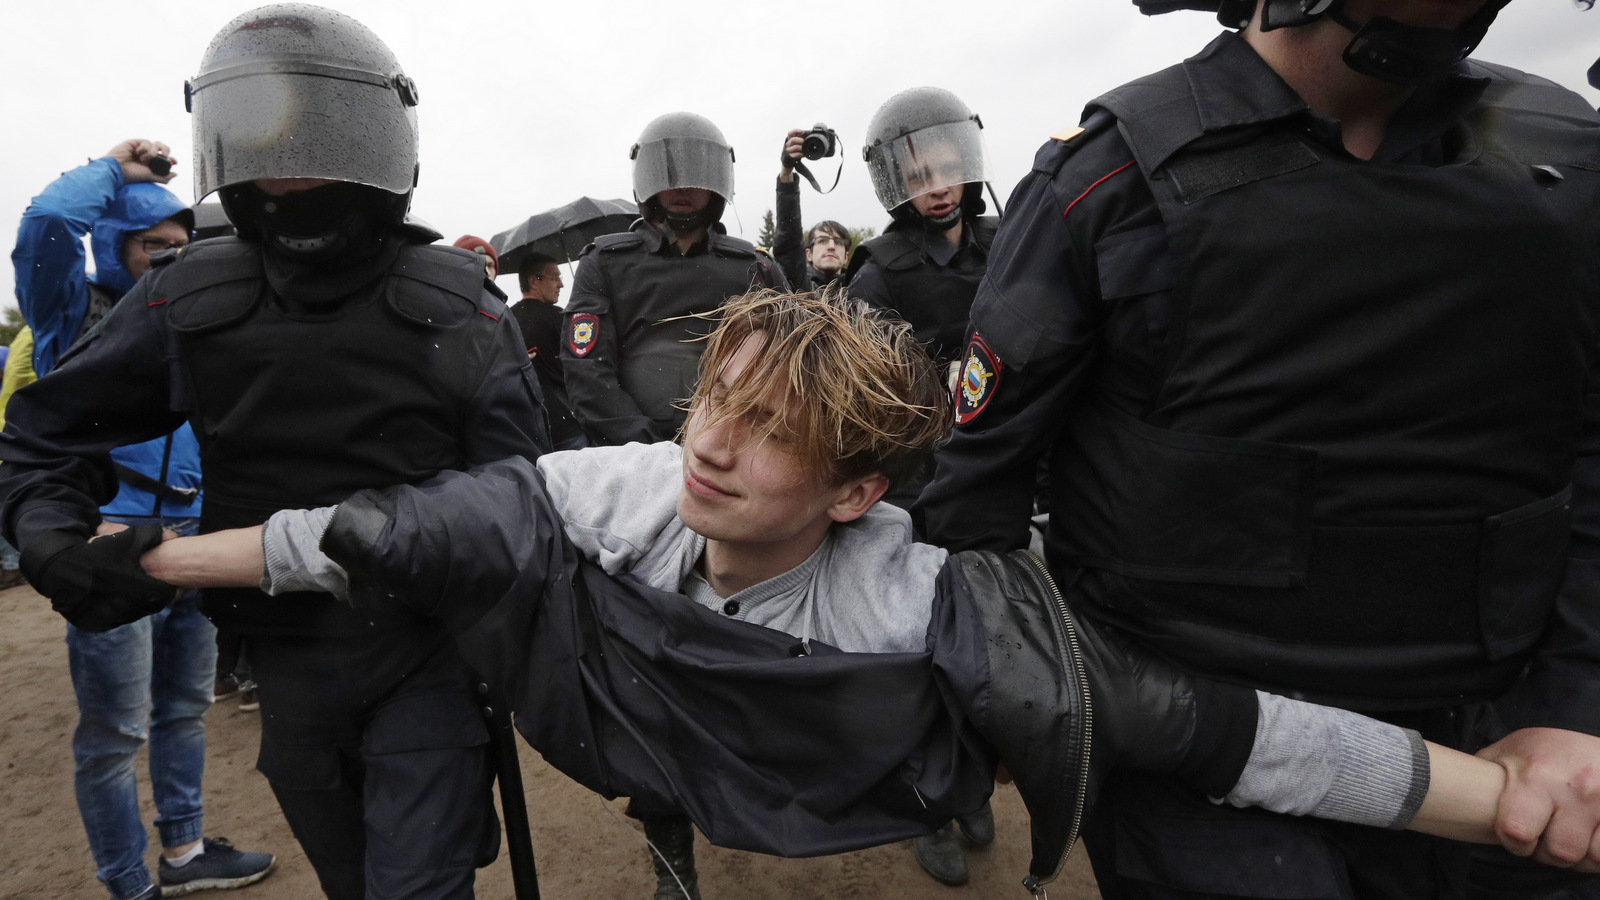 Police detain a protester during anti corruption rally in St.Petersburg, Russia, Monday, June 12, 2017. The protest gatherings in cities from Far East Pacific ports to St. Petersburg were spearheaded by Alexei Navalny, the anti-corruption campaigner who has become the Kremlin's most visible opponent. (AP/Dmitri Lovetsky)